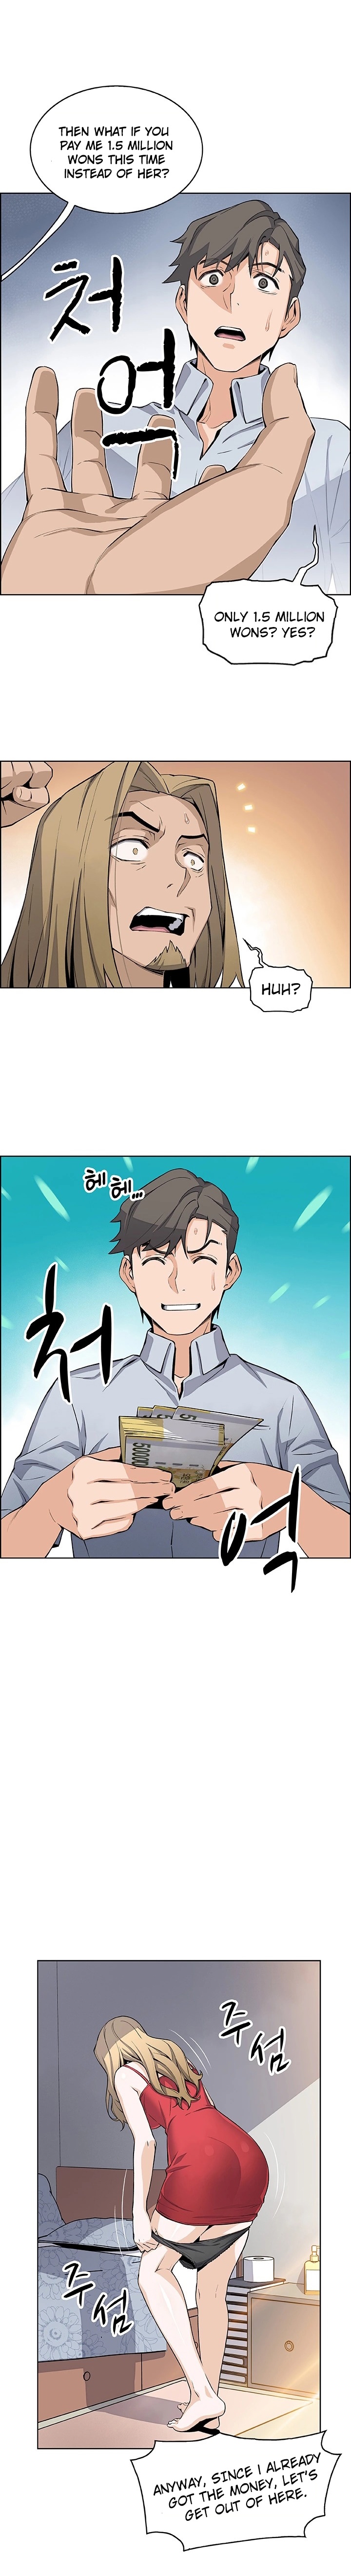 Housekeeper Manhwa - Chapter 22 Page 12